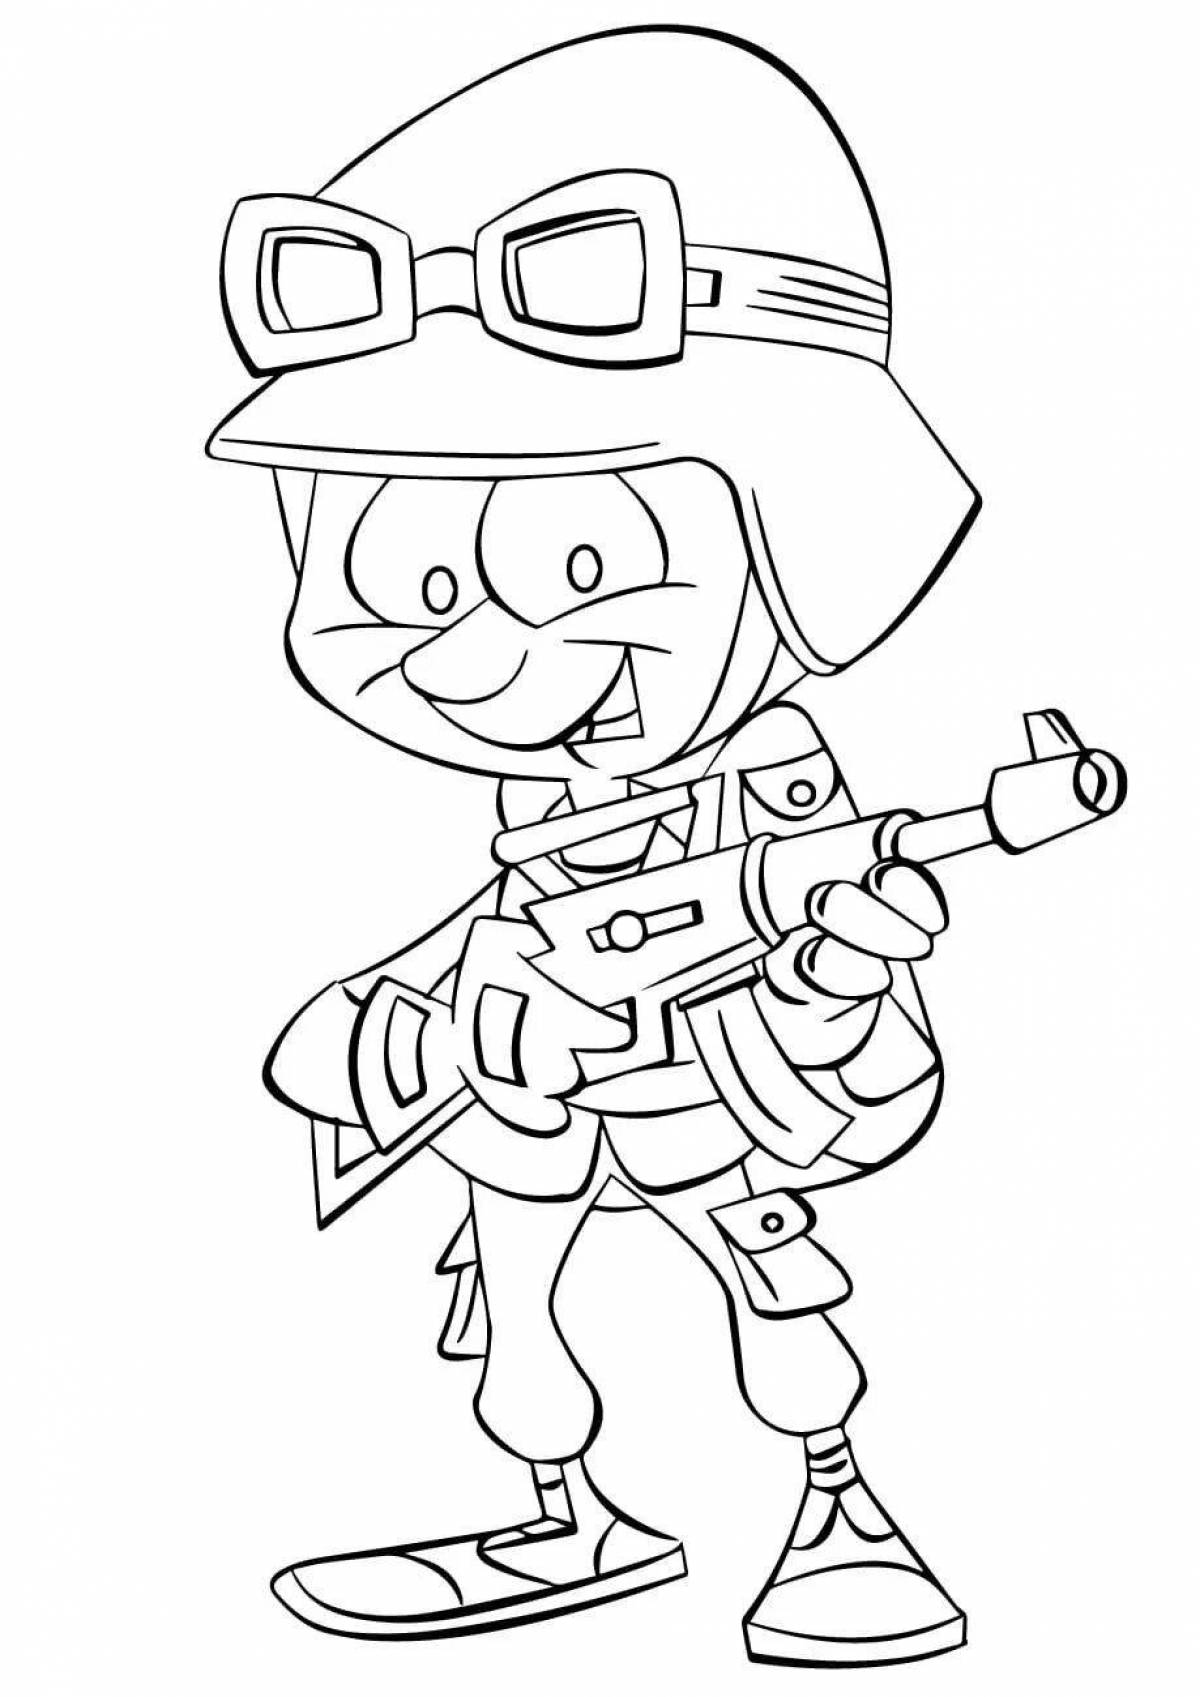 Rampant toy soldiers coloring book for boys